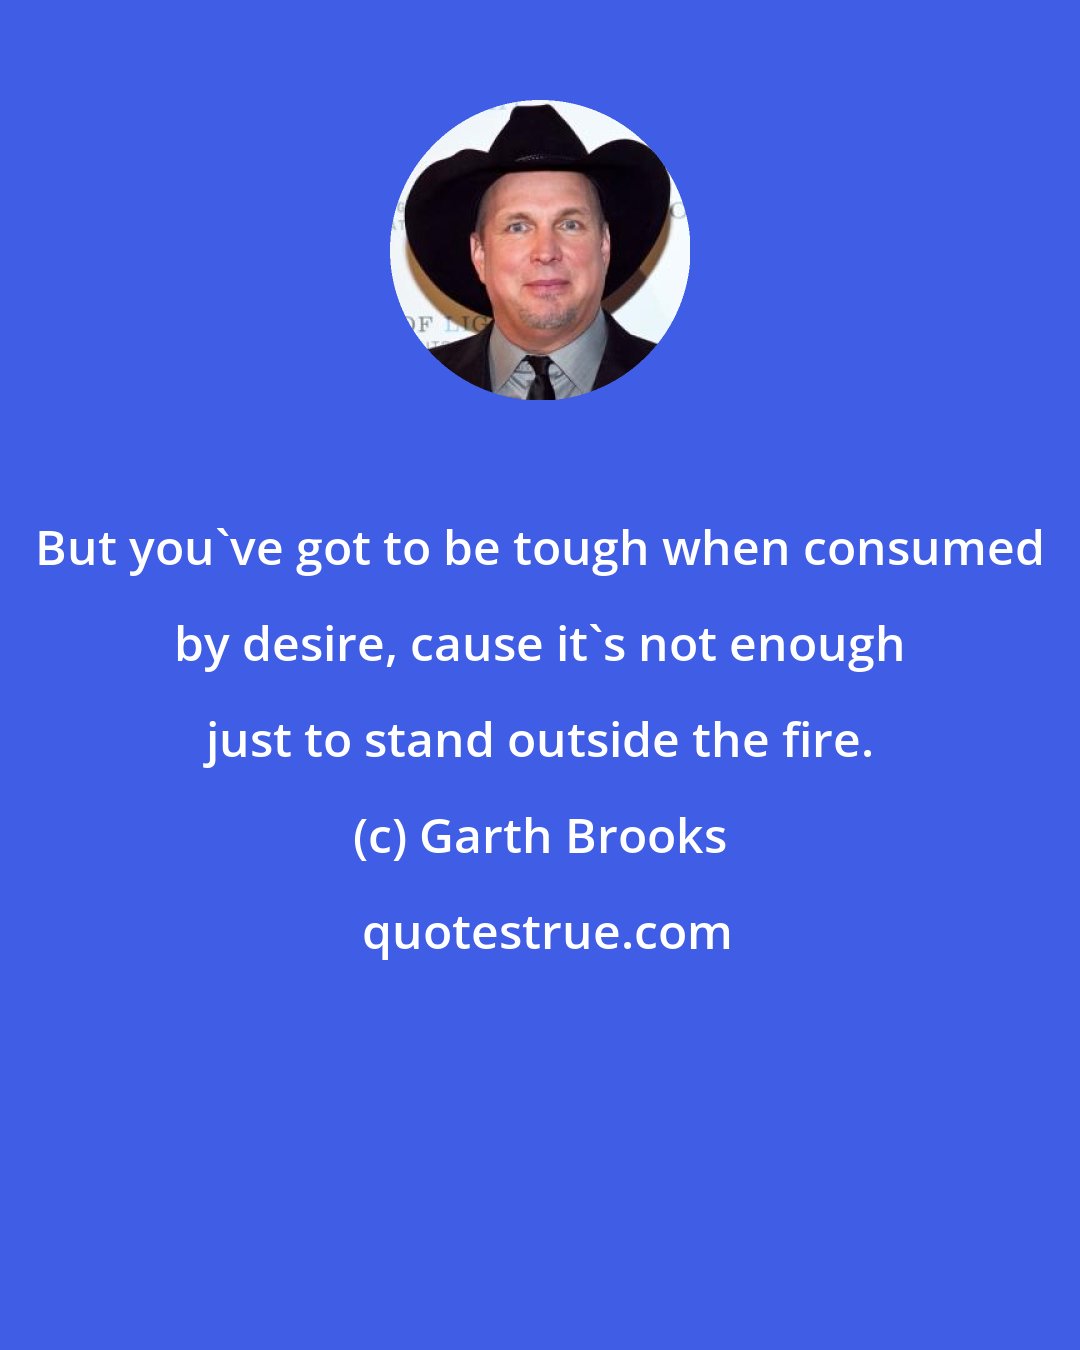 Garth Brooks: But you've got to be tough when consumed by desire, cause it's not enough just to stand outside the fire.